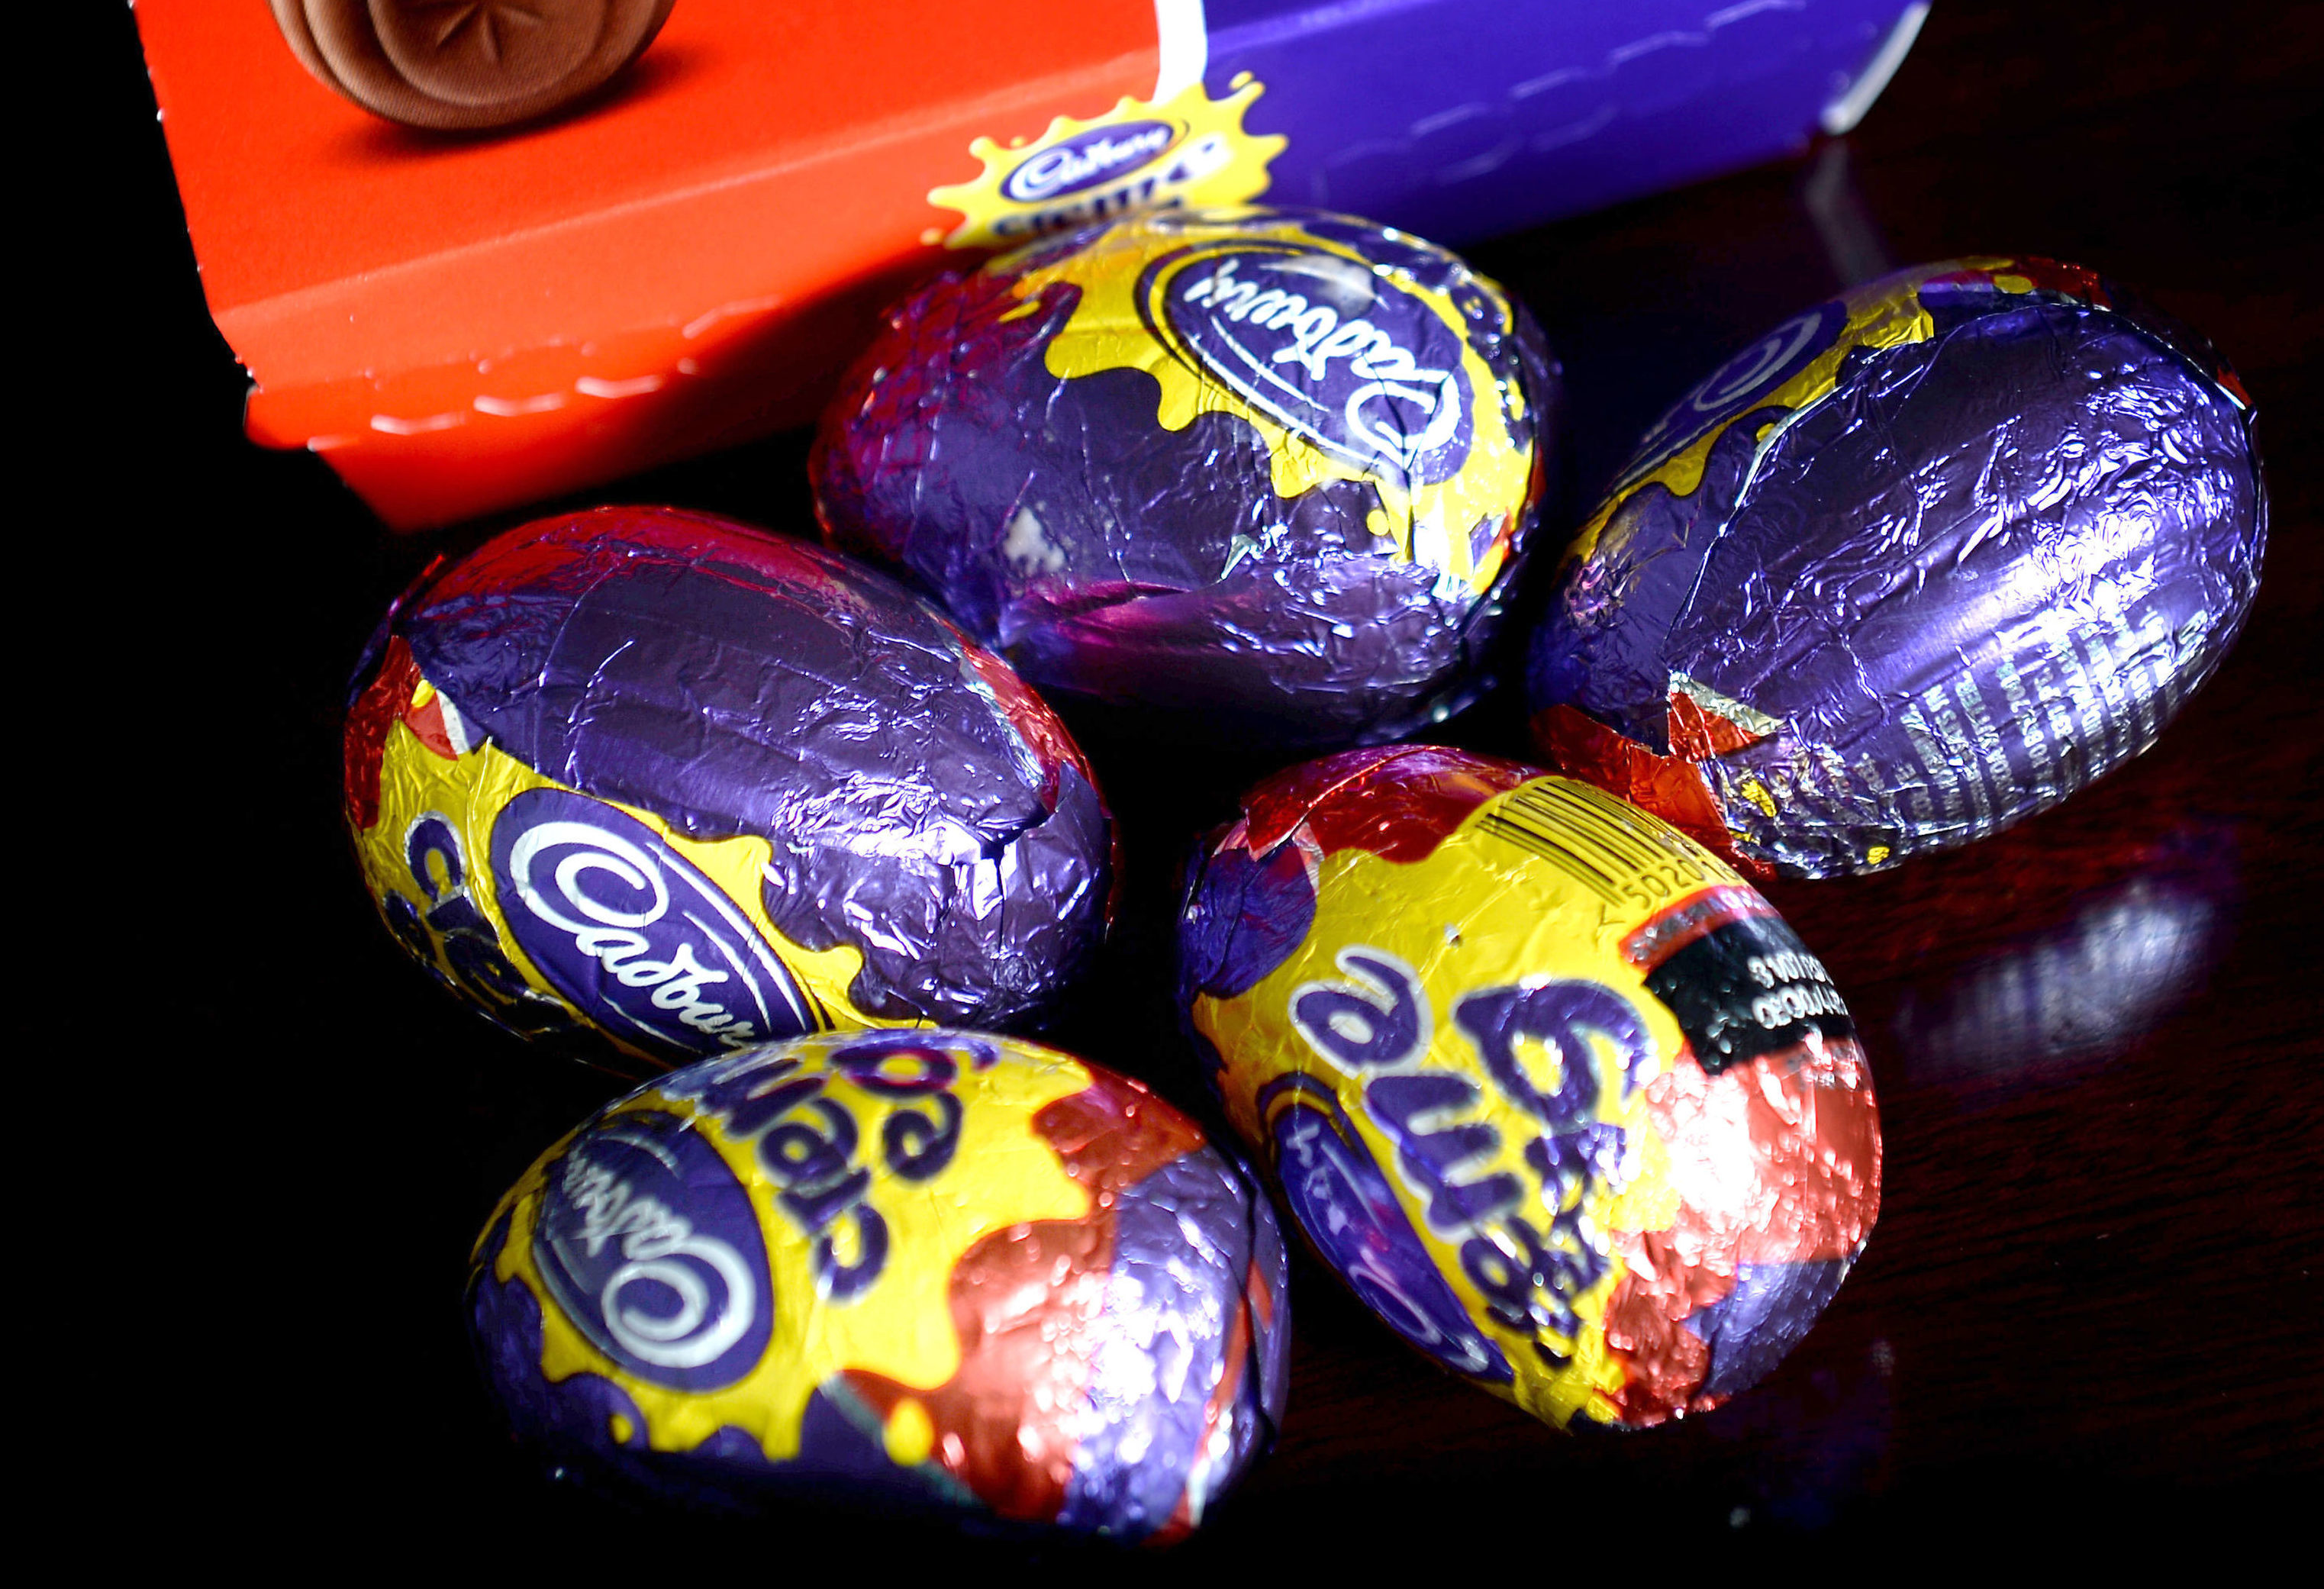 Adverts for Cadbury eggs and Chewits and Squashies sweets have been banned (Anthony Devlin/PA Wire)